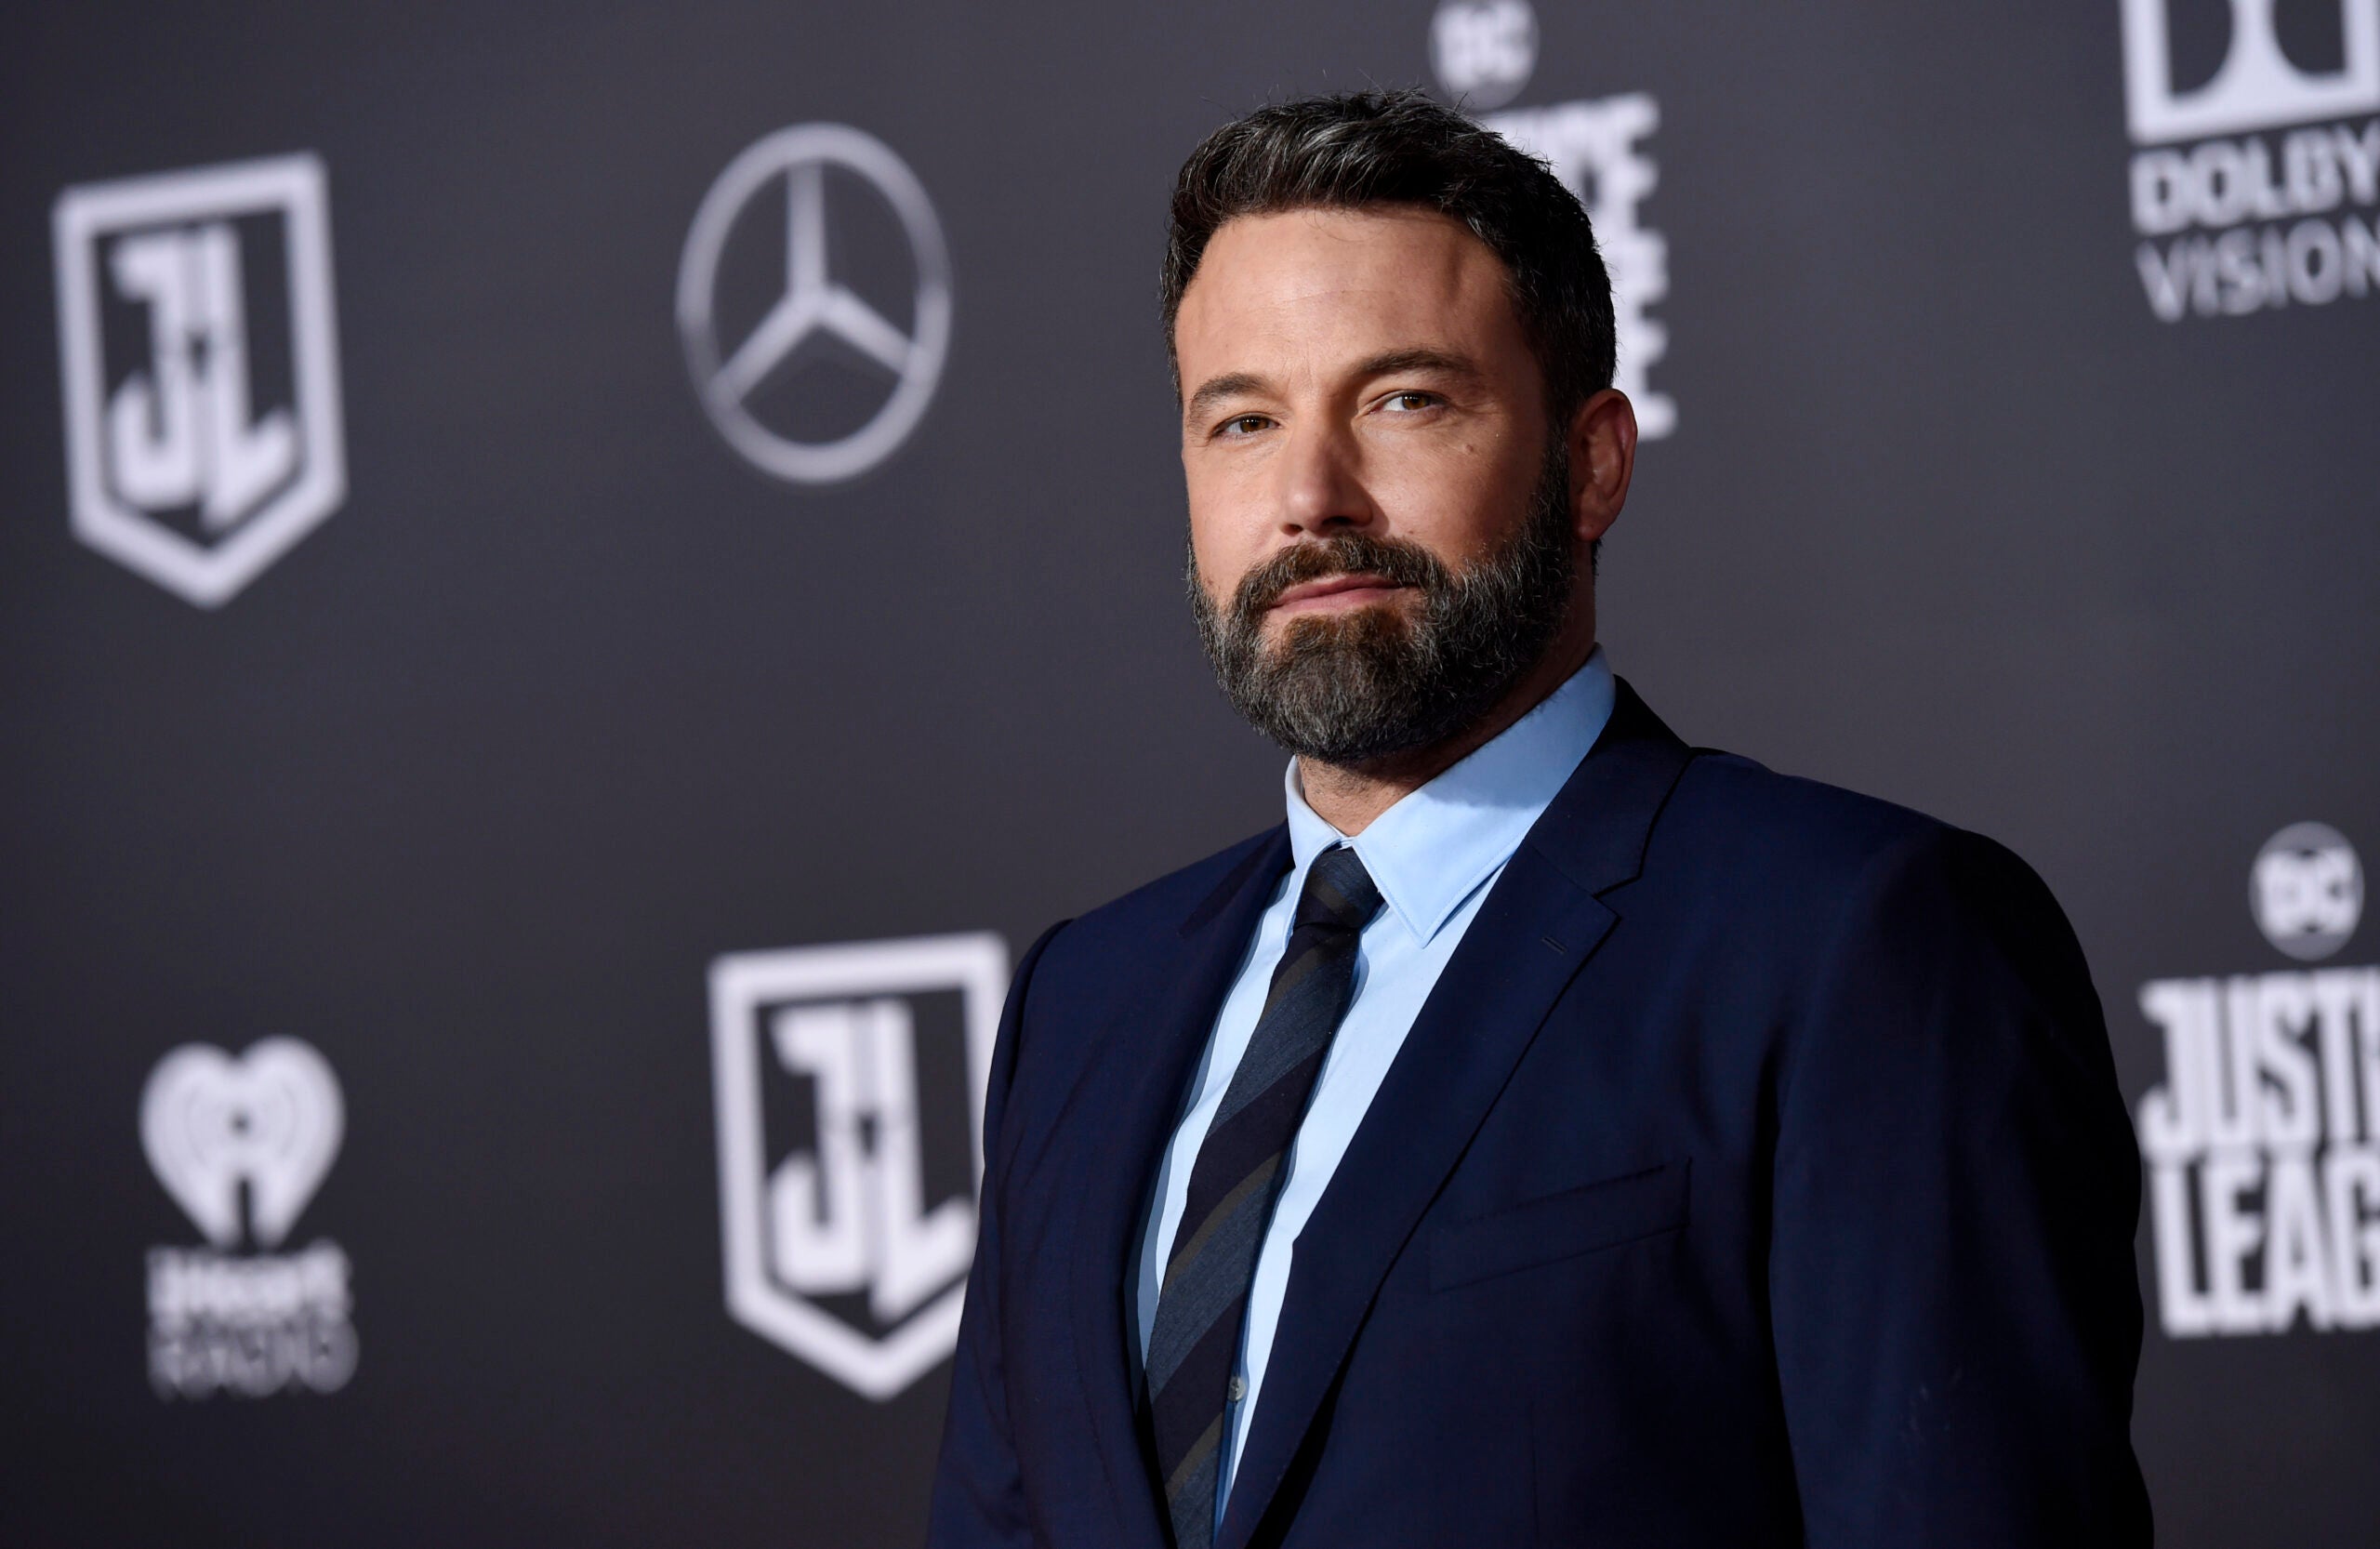 Ben Affleck and Martin Scorsese to team up on new movie